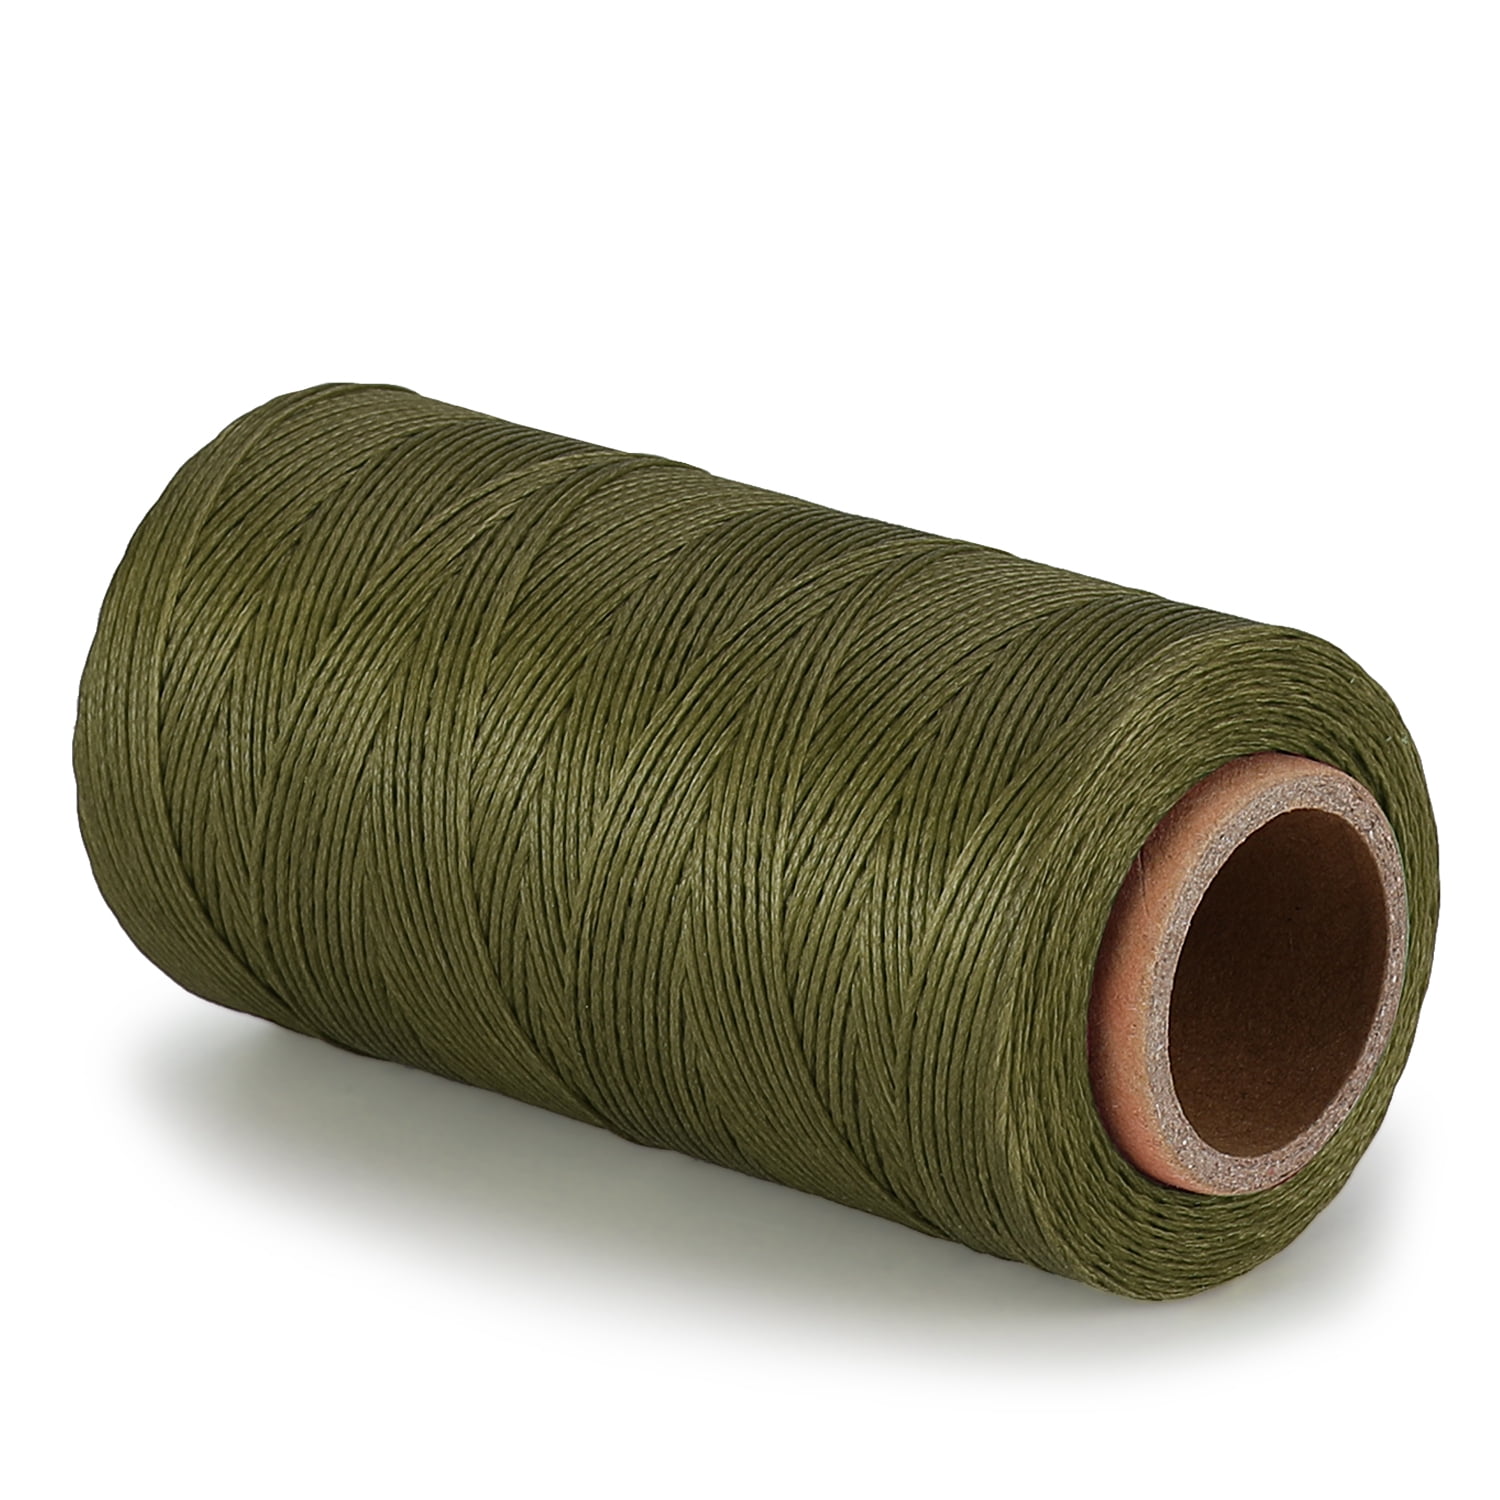 UPHOLSTERY BARBOUR TWINE, 3,4,6, Nylon Buttoning, LACING CORD, WAXED Thread